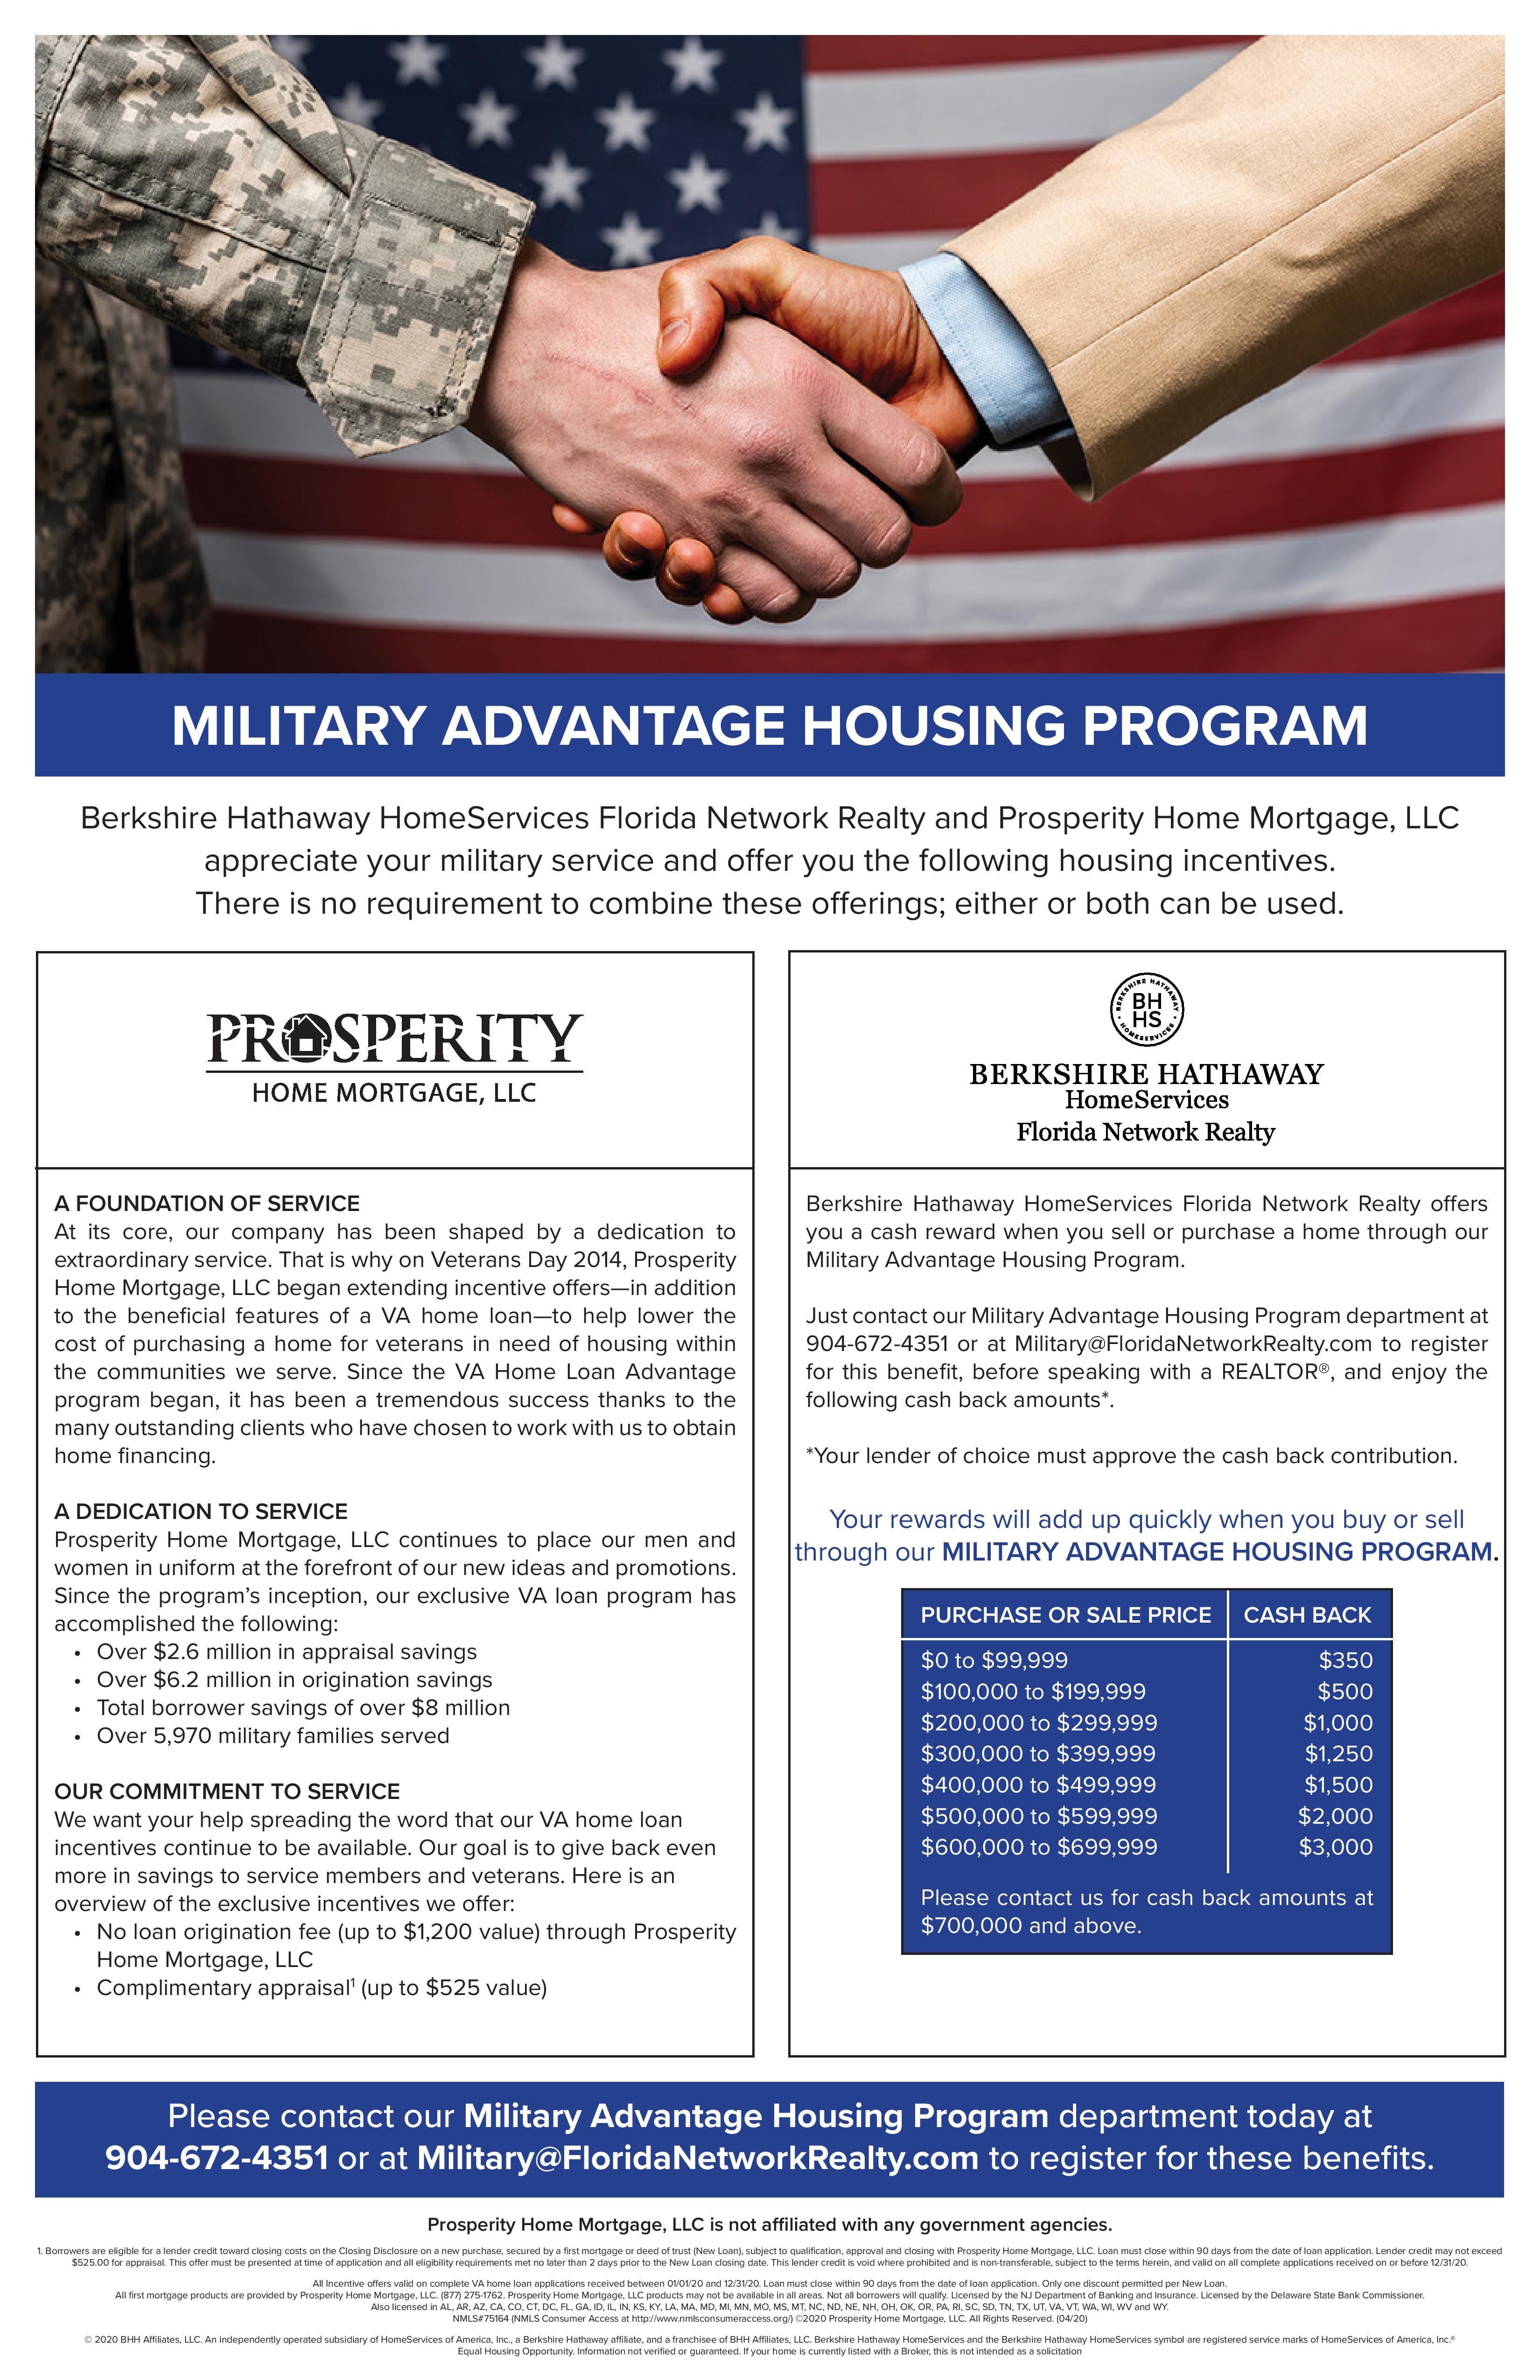 Military Advantage Housing Program. Berkshire Hathaway HomeServices Florida Network Realty and Prosperity Home Mortgage, LLC appreciate your military service and offer you the following housing incentives. There is no requirement to combine these offerings; either or both can be used.

Prosperity Home Mortgage, LLC. Foundation of Service. At its core, our company has been shaped by a dedication to extraordinary service. That is why on Veterans Day 2014, Prosperity Home Mortgage, LLC began extending incentive offers - in addition to the beneficial features of a VA home loan - to help lower the cost of purchasing a home for veterans nin need of housing within the communities we serve. Since the VA Home Loan Advantage program began, it has been a tremendous success thanks to the many outstanding clients who have chosen to work with us to obtain home financing. 

A Dedication To Service. Prosperity Home Mortgage, LLC continues to place our men and women in uniform at the forefront of our new ideas and promotions. Since the program's inception, our exclusive VA loan program has accomplished the following: Over $2.6 million in appraisal savings; Over $6.2 million in origination savings; Total borrow savings of over $8 million; Over 5,970 military families served. 

Our Commitment To Service. We want your help spreading the word that our VA home loan incentives continue to be available. Our goal is to give back even more in savings to service members and veterans. Here is an overview of the exclusive incentives we offer: No loan origination fee (up to $1,200 value) through Prosperity Home Mortgage, LLC; Complimentary appraise (up to $525 value). 

Berkshire Hathaway HomeServices Florida Network Realty. Berkshire Hathaway HomeServices Florida Network Realty offers you a cash reward when you sell or purchase a home through our Military Advantage Housing Program. Just contact our Military Advantage Housing Program department at 904-672-4351 or at Military@FloridaNetworkRealty.com to register for this benefit, before speaking with a REALTOR, and enjoy the following cash back amounts: (Your lender of choice must approve the cash back contribution) Your rewards will add up quickly when you buy or sell through our MILITARY ADVANTAGE HOUSING PROGRAM.

Purchase or Sale Price:
$0 to $99,999 Cash Back $350. $100,000 to $199,999 Cash Back $500. $200,000 to $299,999 Cash Back $1,000. $300,000 to $399,999 Cash Back $1,250. $400,000 to $499,999 Cash Back $1,500. $500,000 to $599,999 Cash Back $2,000. $600,000 to $699,999 Cash Back $3,000.  Please contact us for cash back amounts at $700,000 and above.

Please contact our Military Advantage Housing Program department today at 904-672-4351 or at Military@FloridaNetworkRealty.com to register for these benefits. 

Prosperity Home Mortgage, LLC is not affiliated with any government agencies.